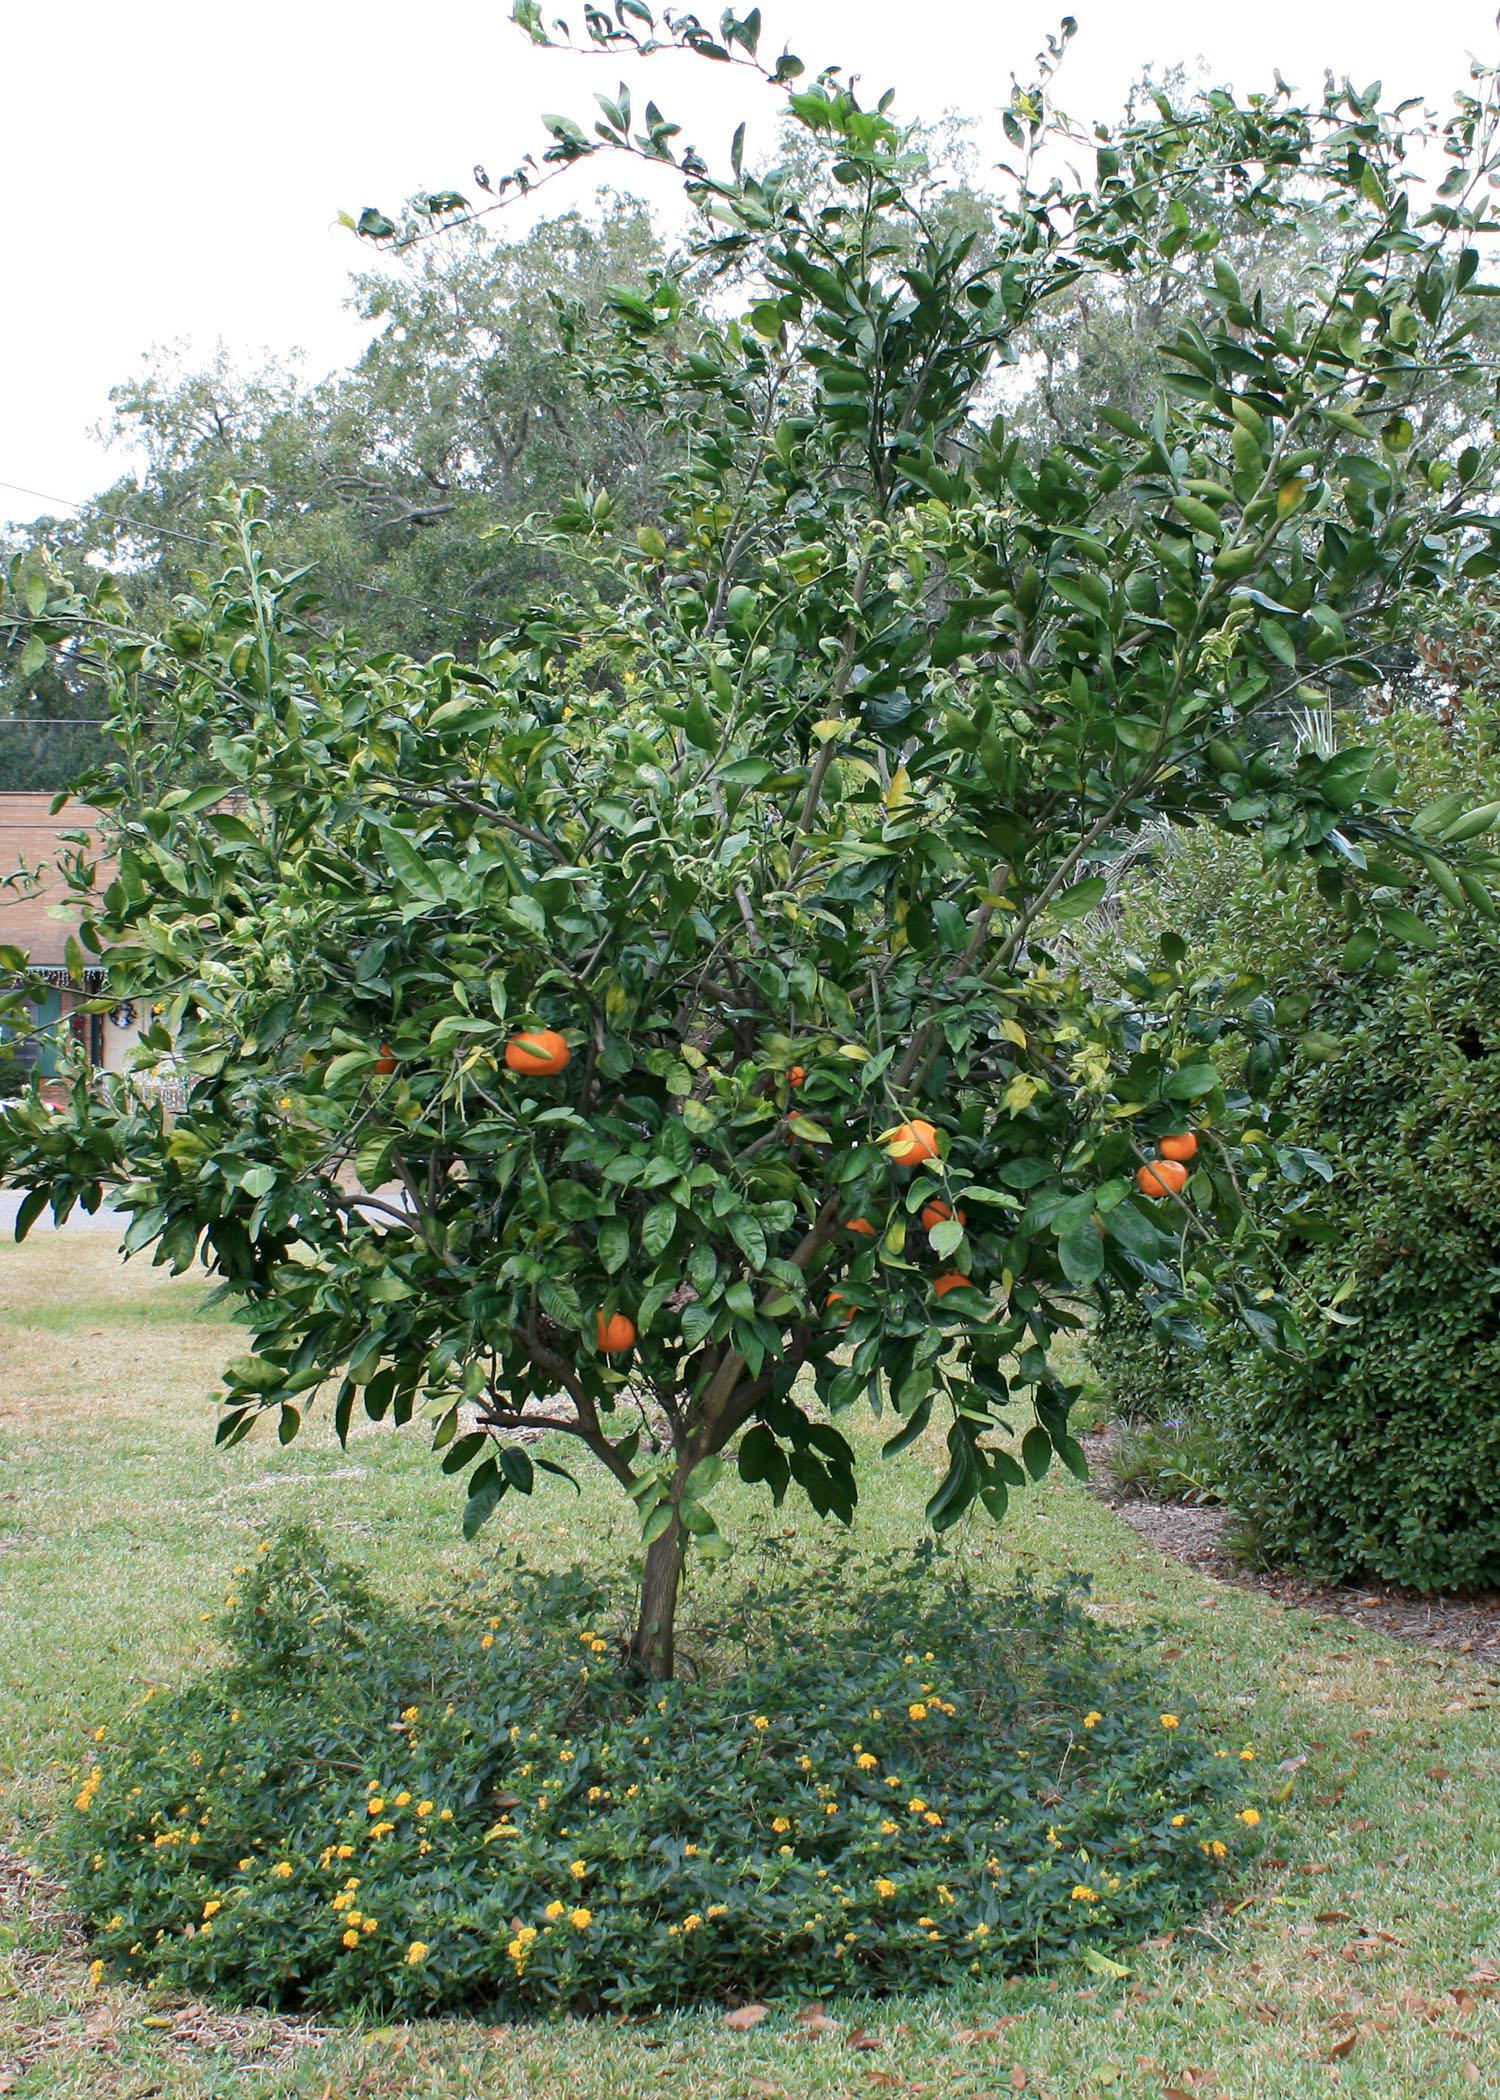 Satsuma oranges grow well in Mississippi and produce very juicy fruits with deep-orange rinds. (Photo by MSU Extension Service/Gary Bachman)